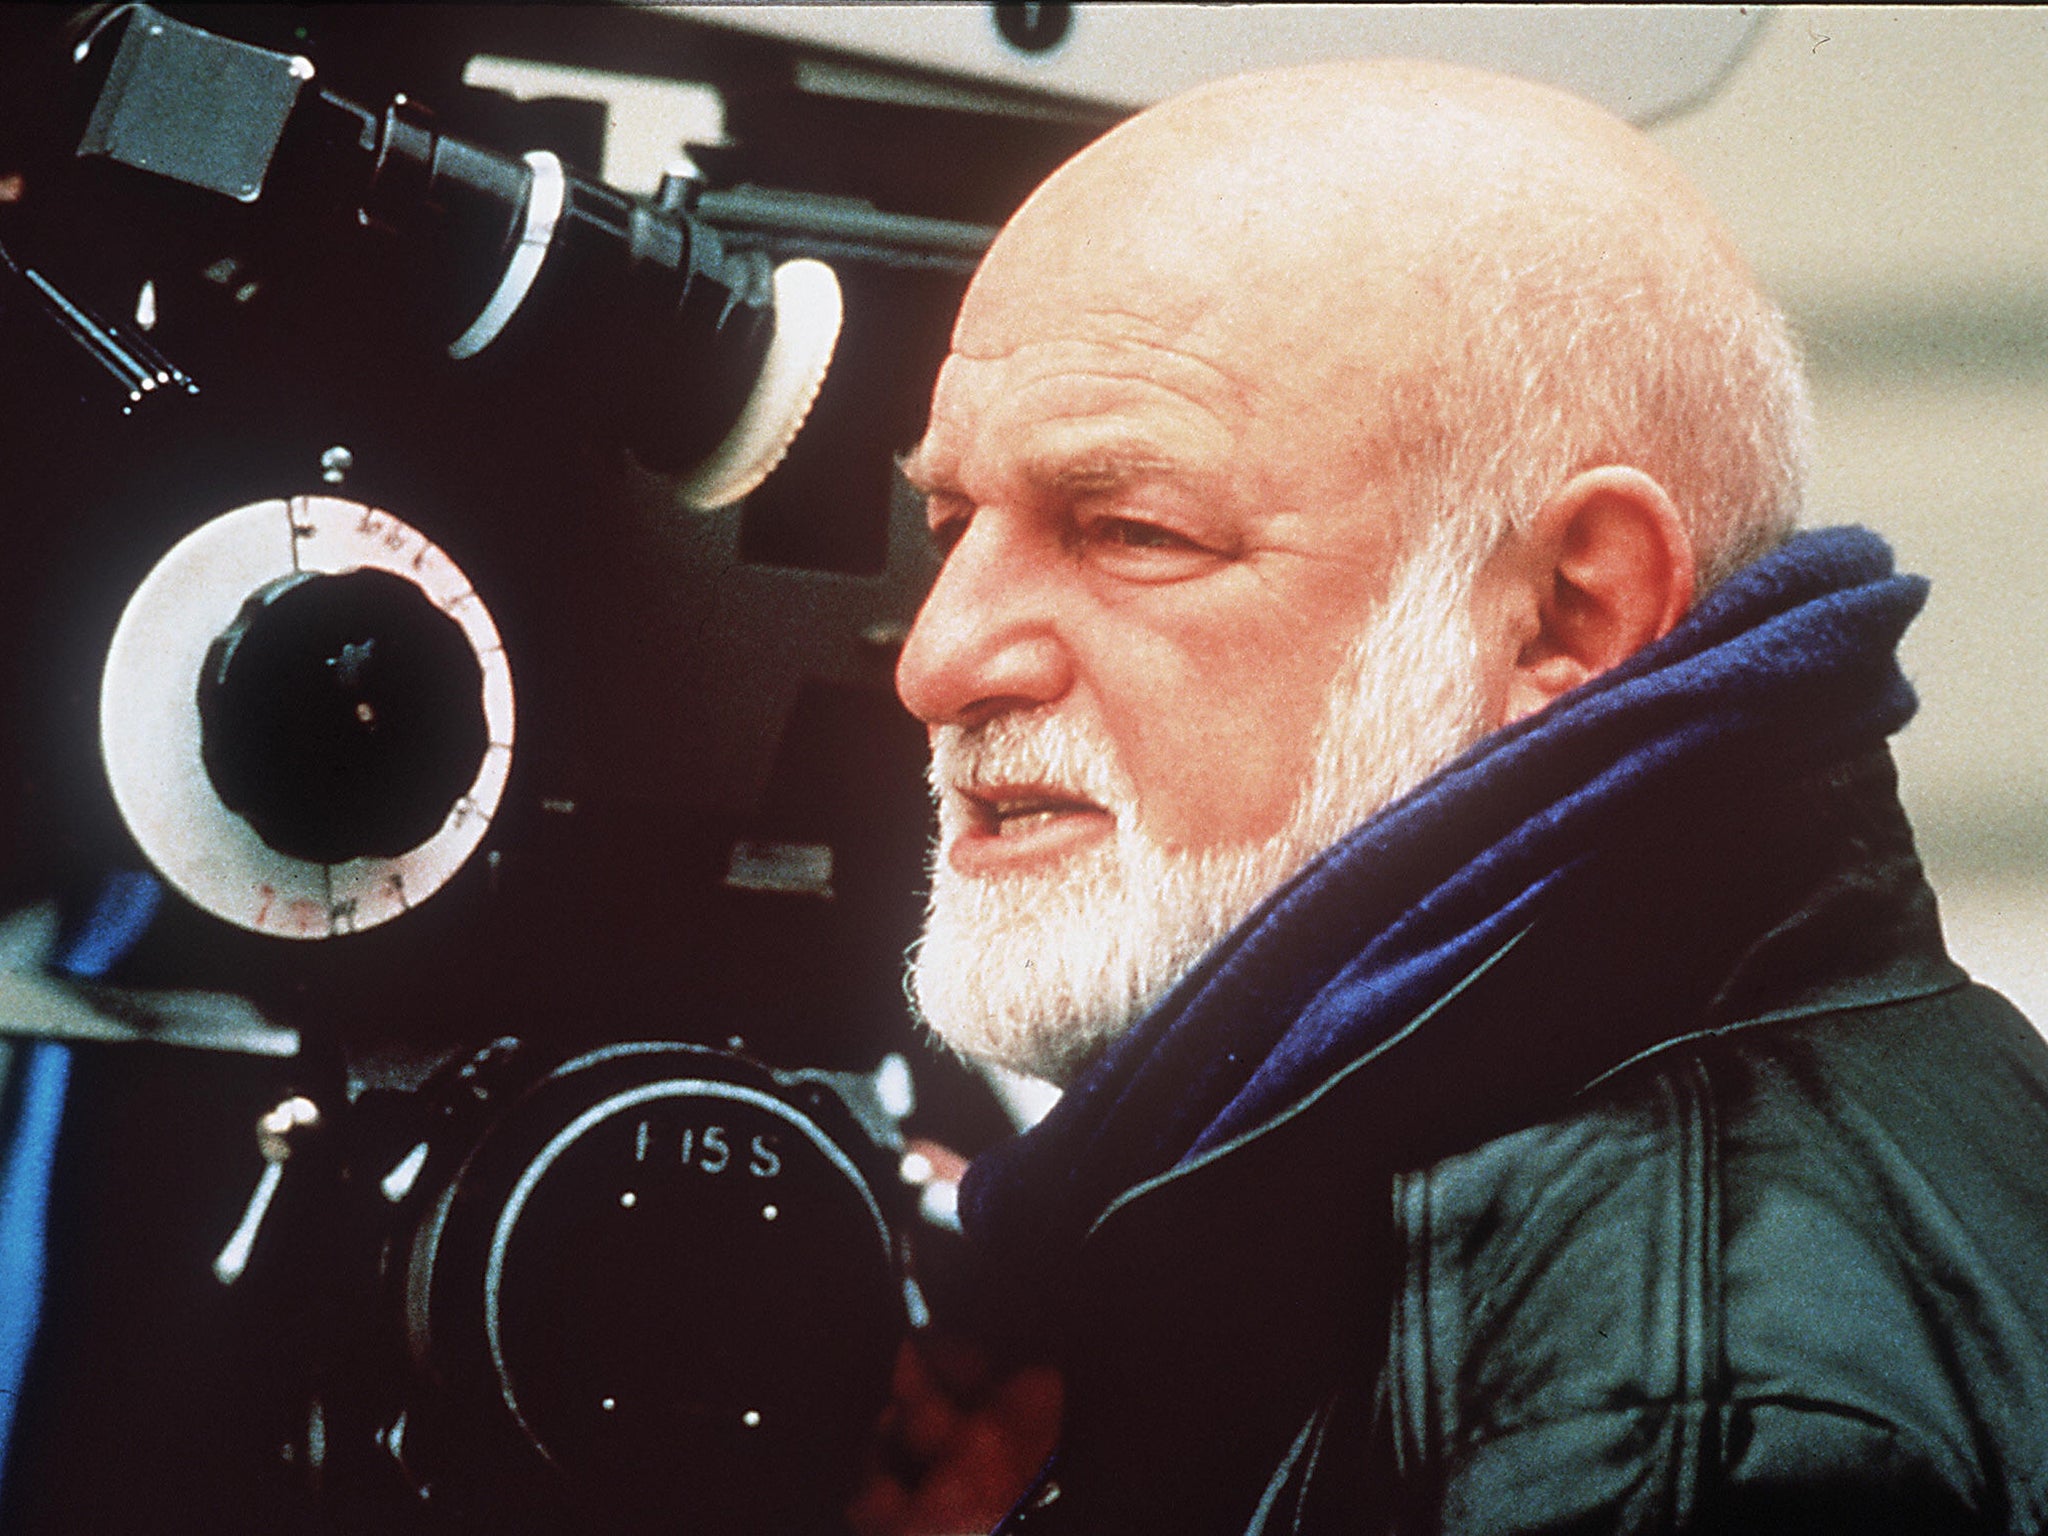 John Schlesinger directed the only X-rated film to win Best Picture. Which one?